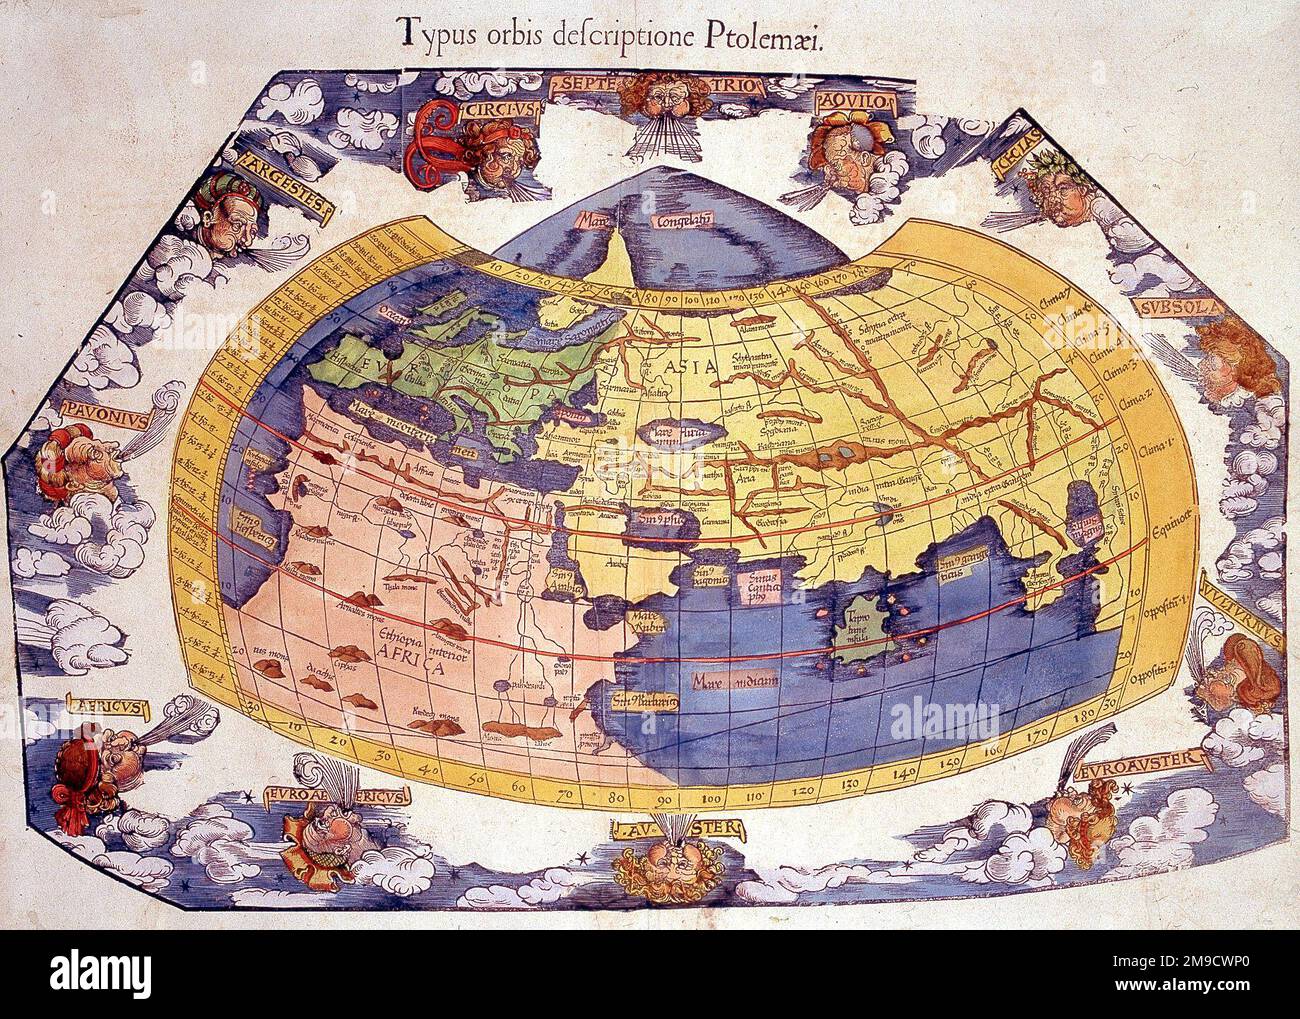 Map of the Old World according to Ptolemy, 2nd century -  Typus orbis descriptione Ptolemaei Stock Photo